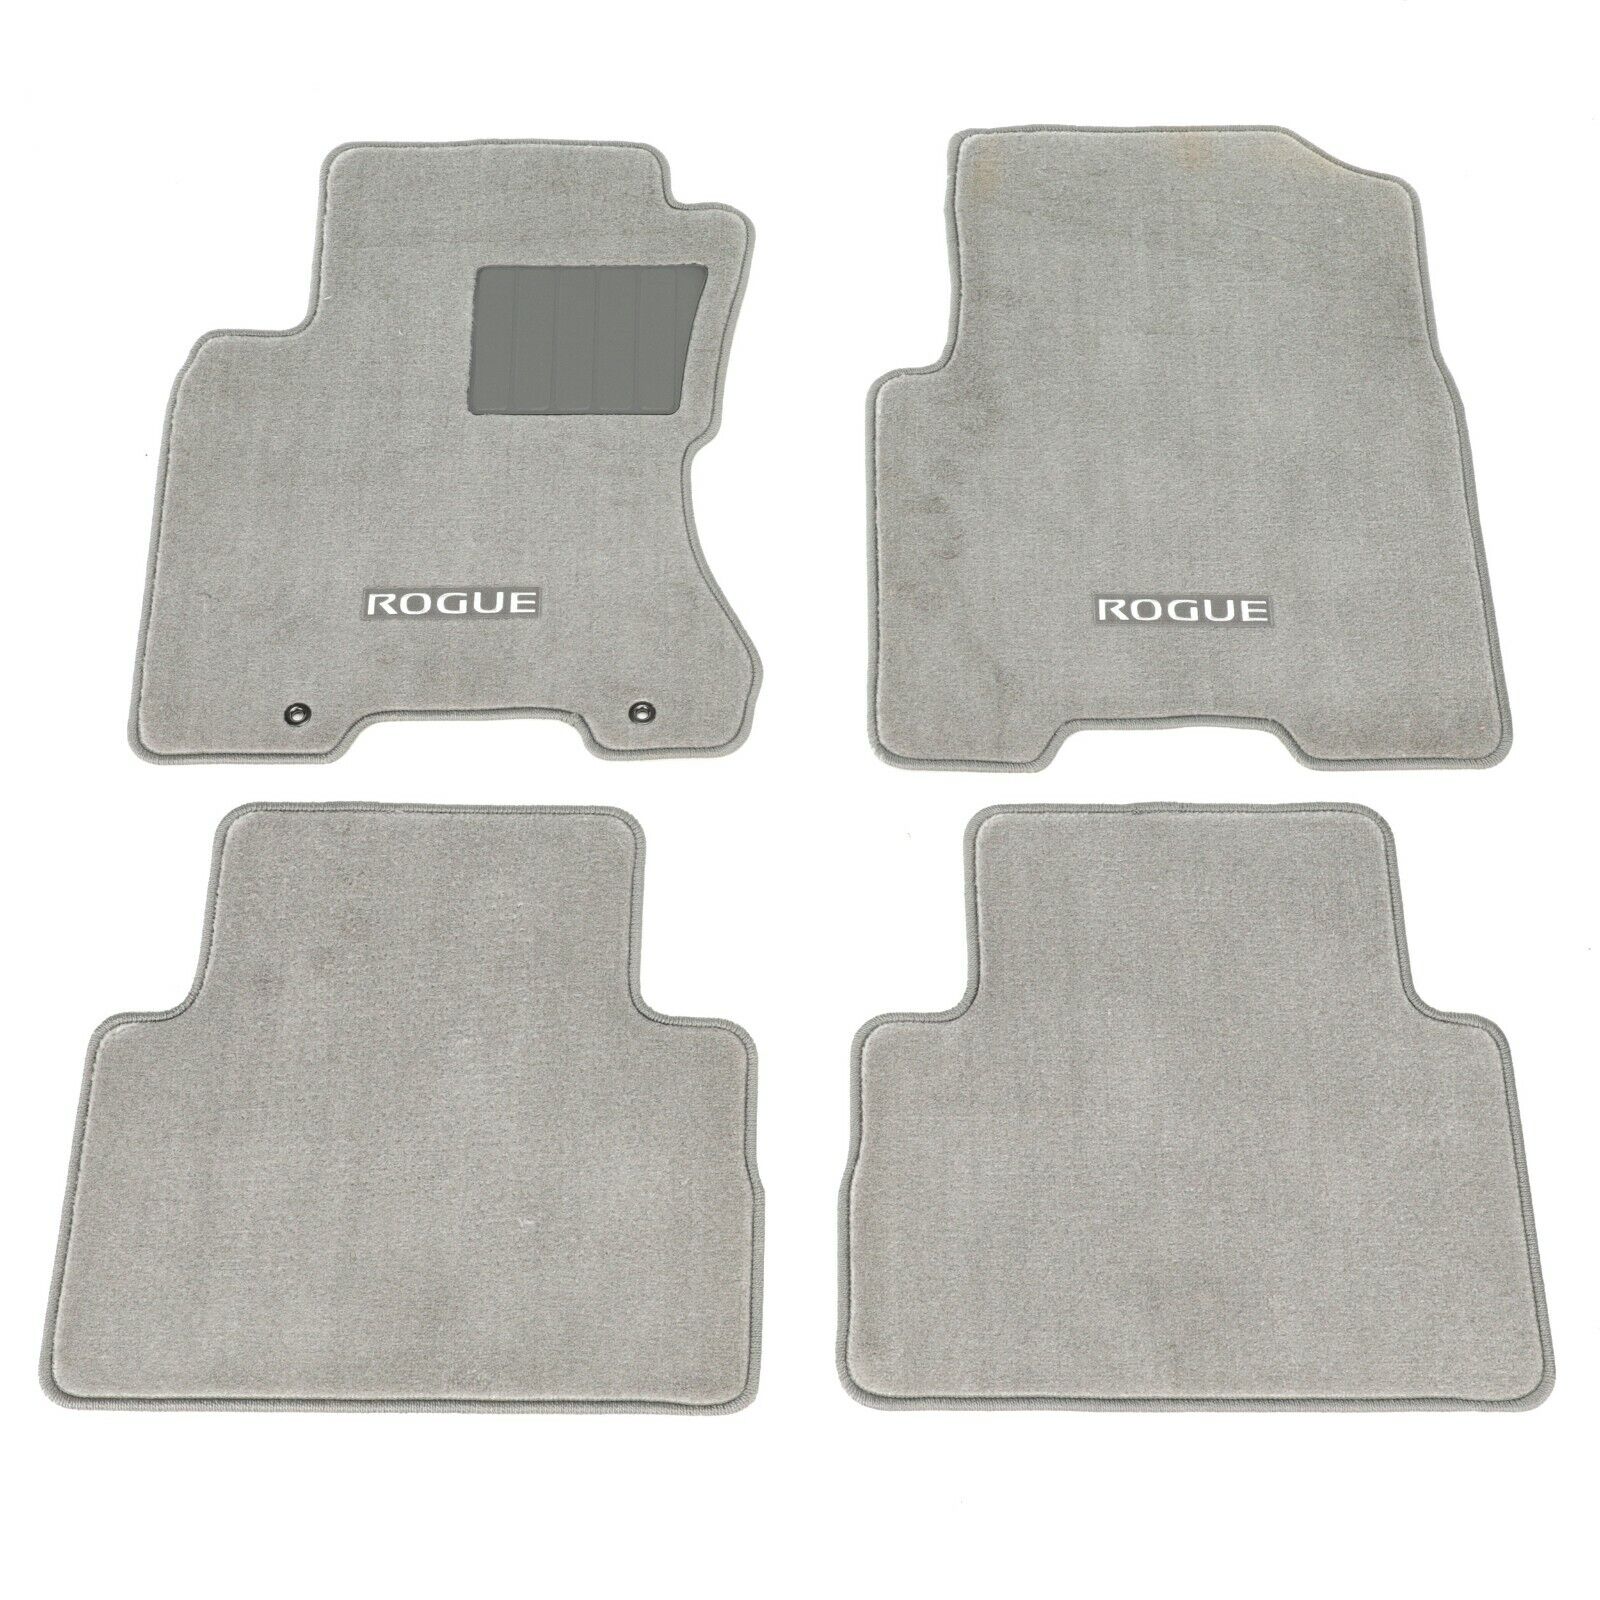 2008-2013 Nissan Rogue Gray Carpeted Floor Mats Front & Rear Set of 4 OEM NEW